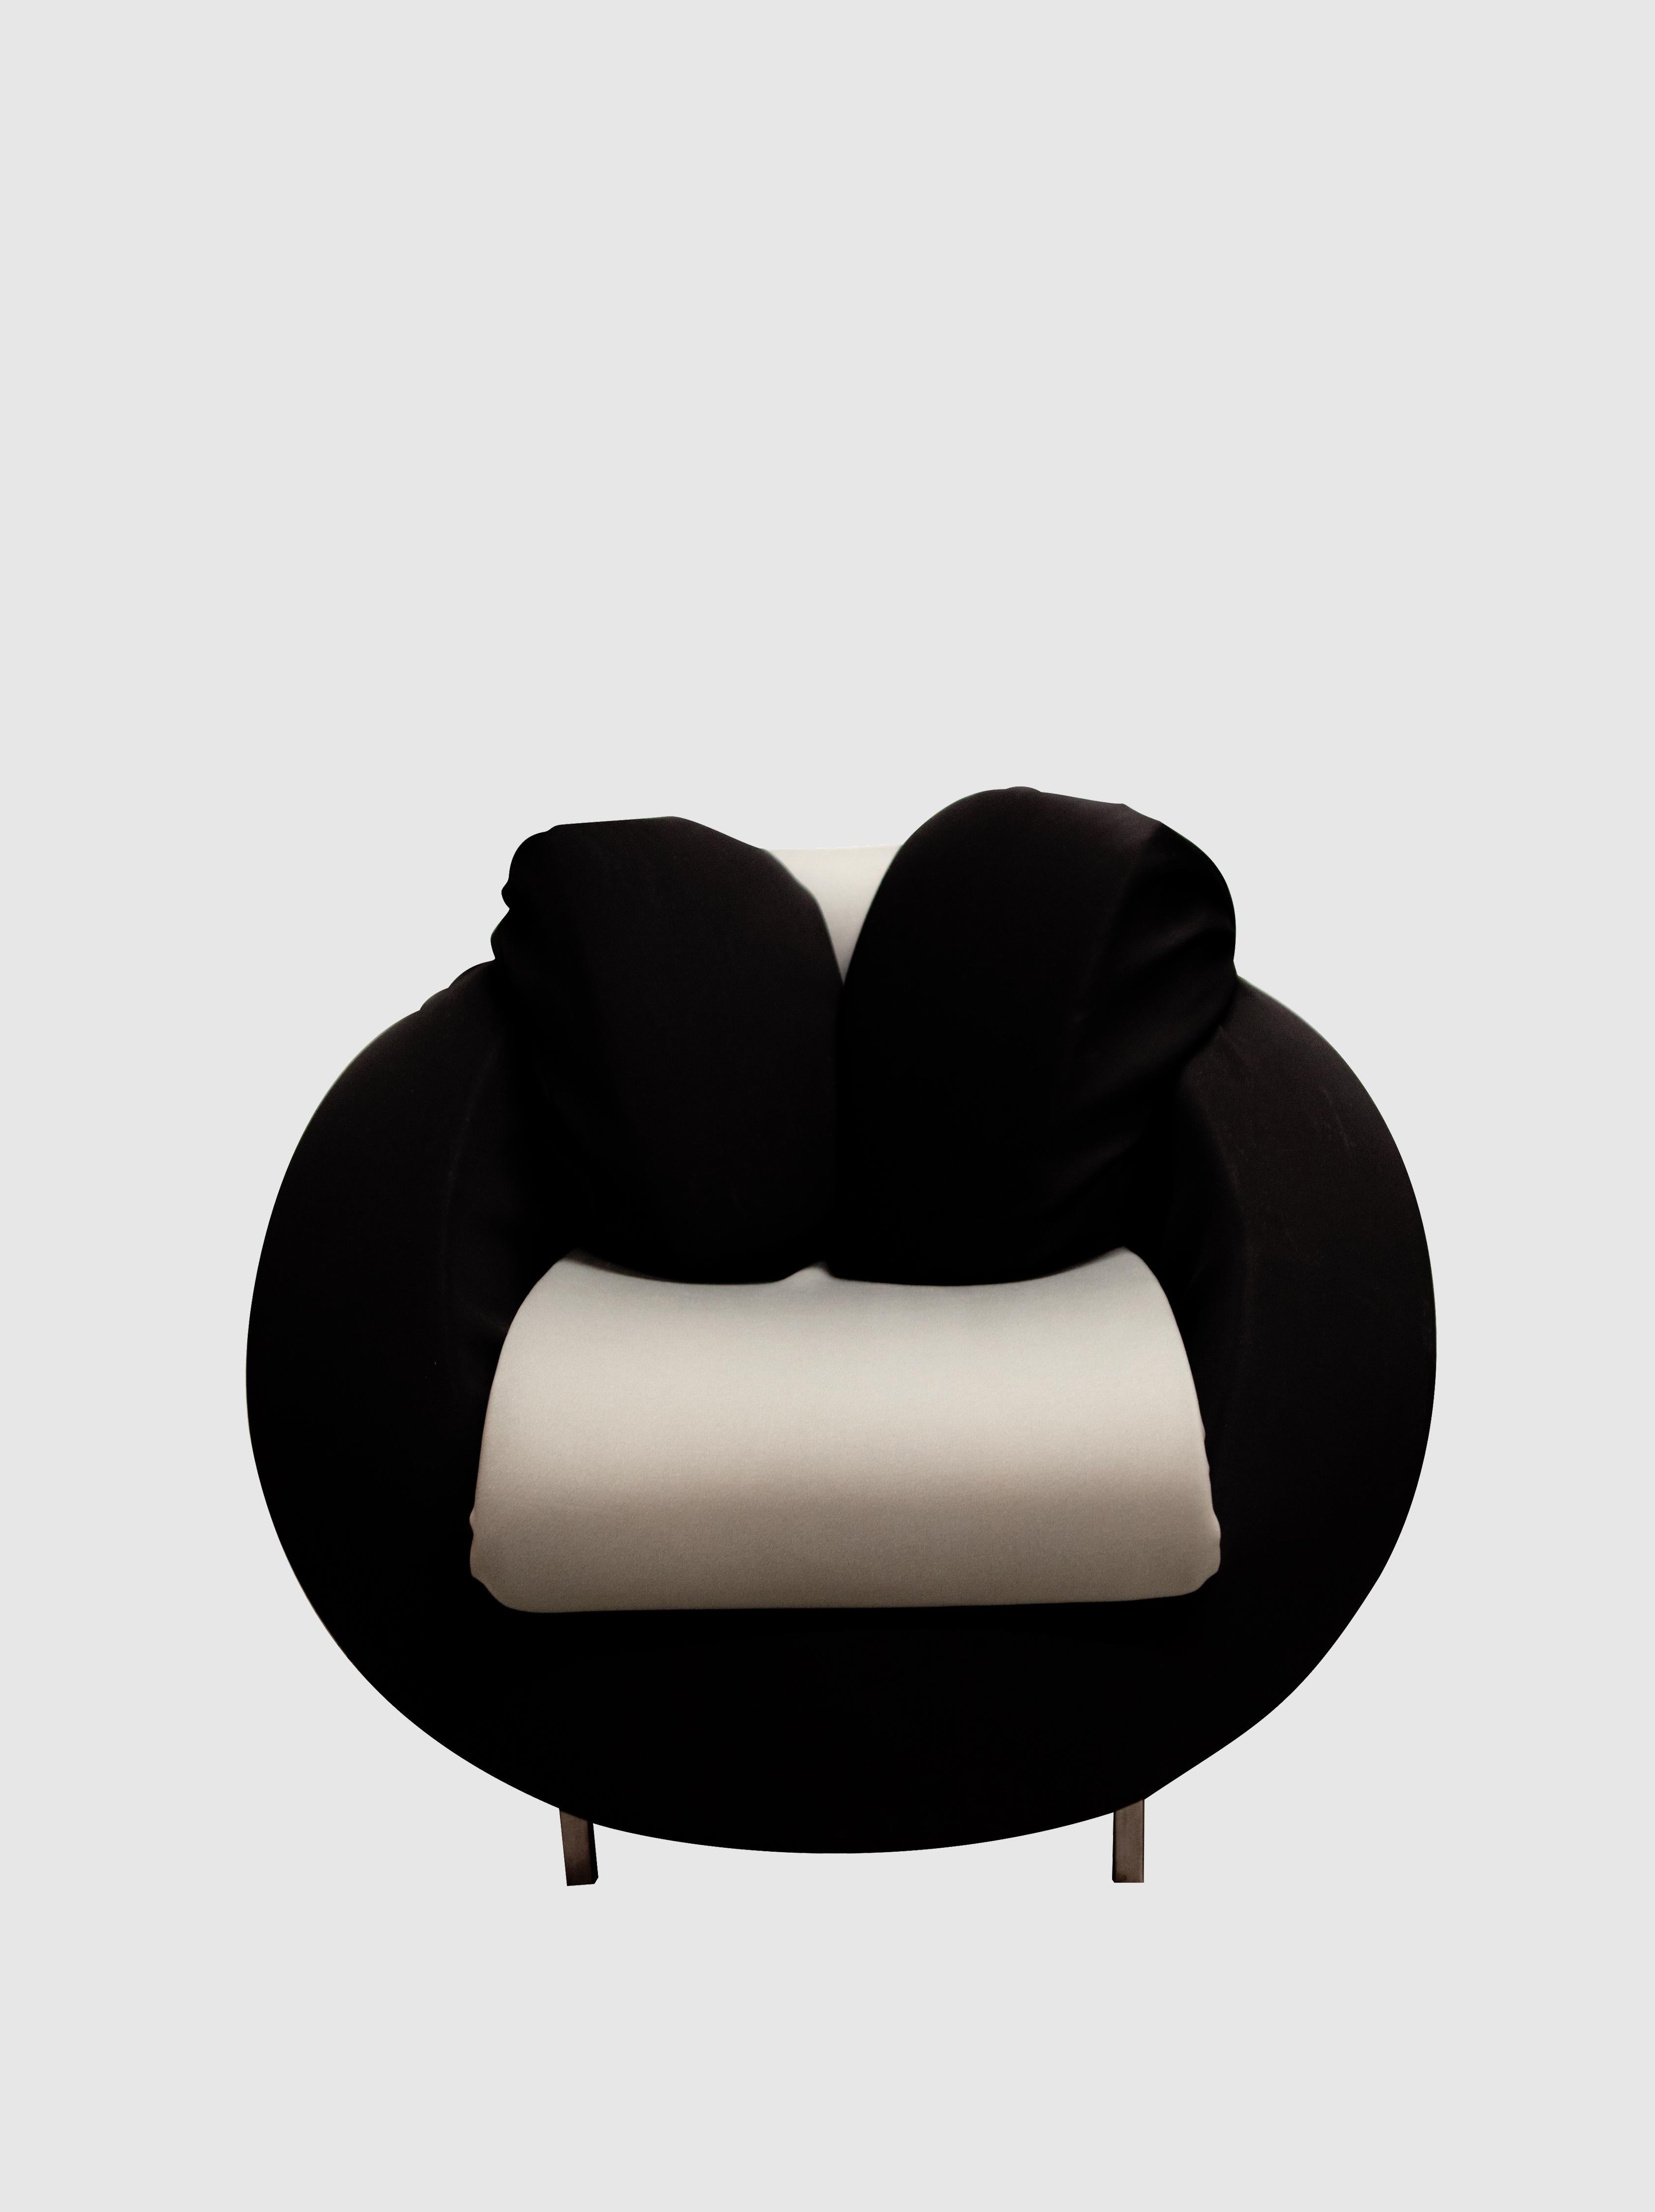 The F.C 03 chair is part of the collection Formas Curvas. It's described as 